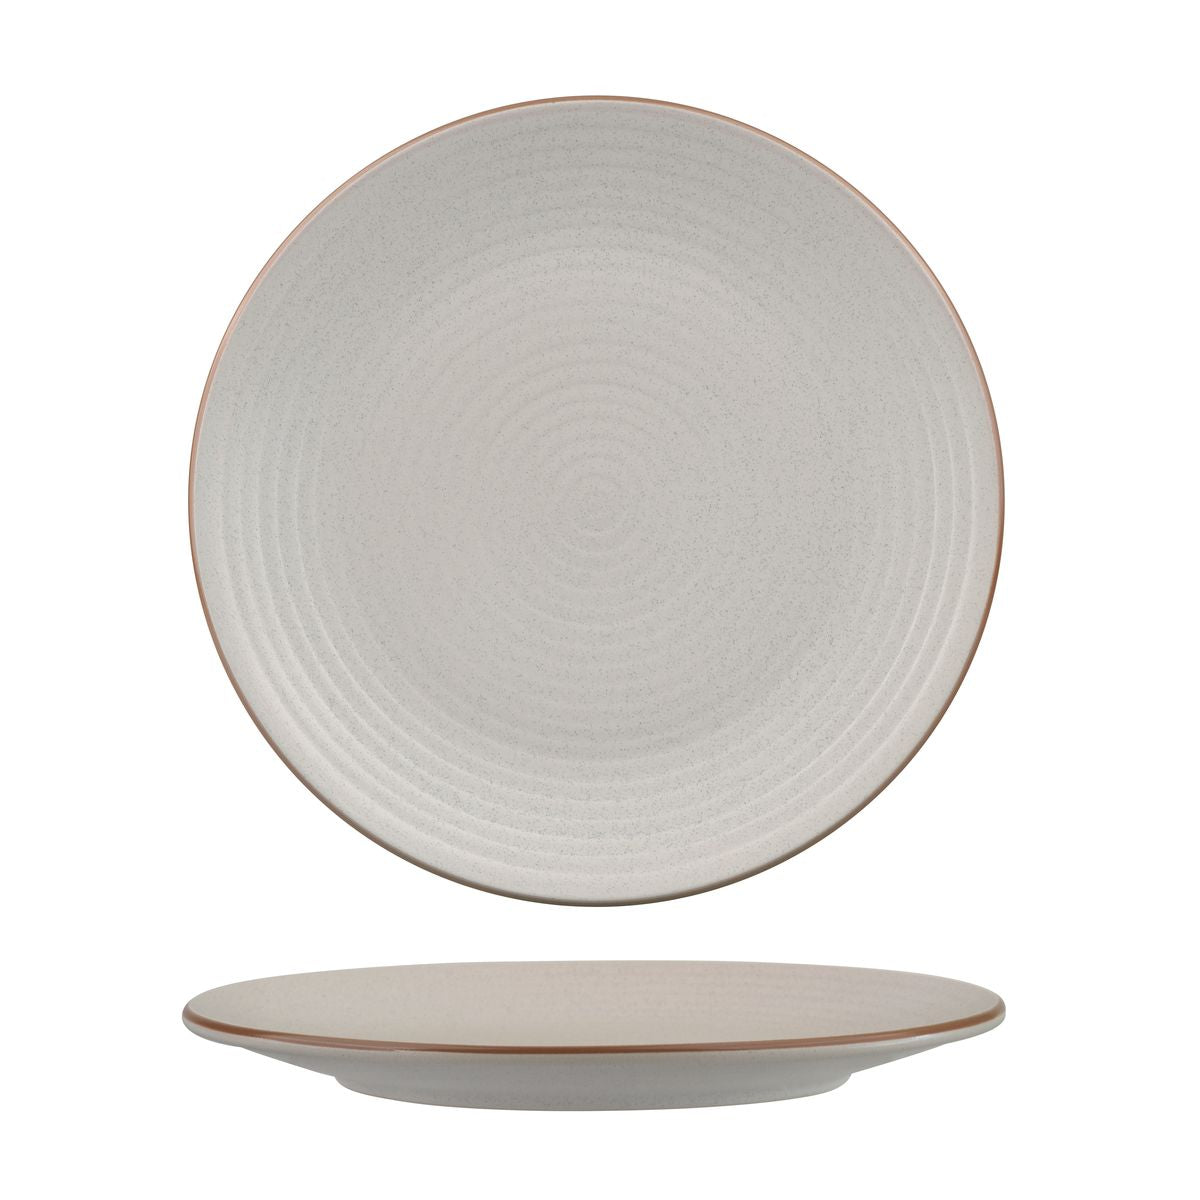 Round Coupe Plate - 265mm, Ribbed, Zuma Mineral from Zuma. Matt Finish, made out of Ceramic and sold in boxes of 6. Hospitality quality at wholesale price with The Flying Fork! 